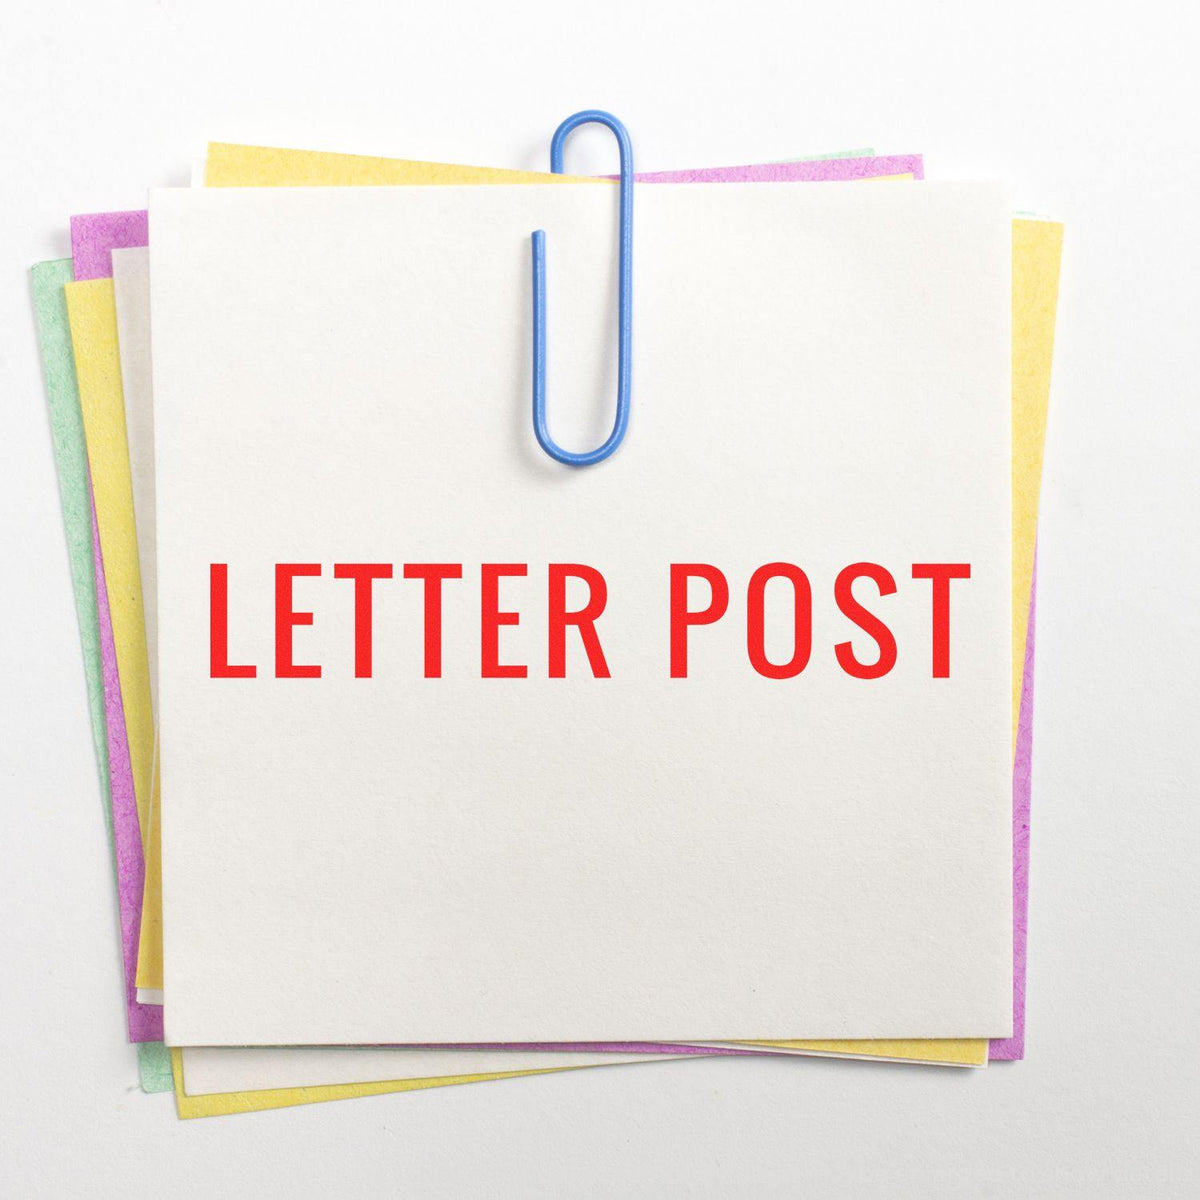 Large Letter Post Rubber Stamp In Use Photo